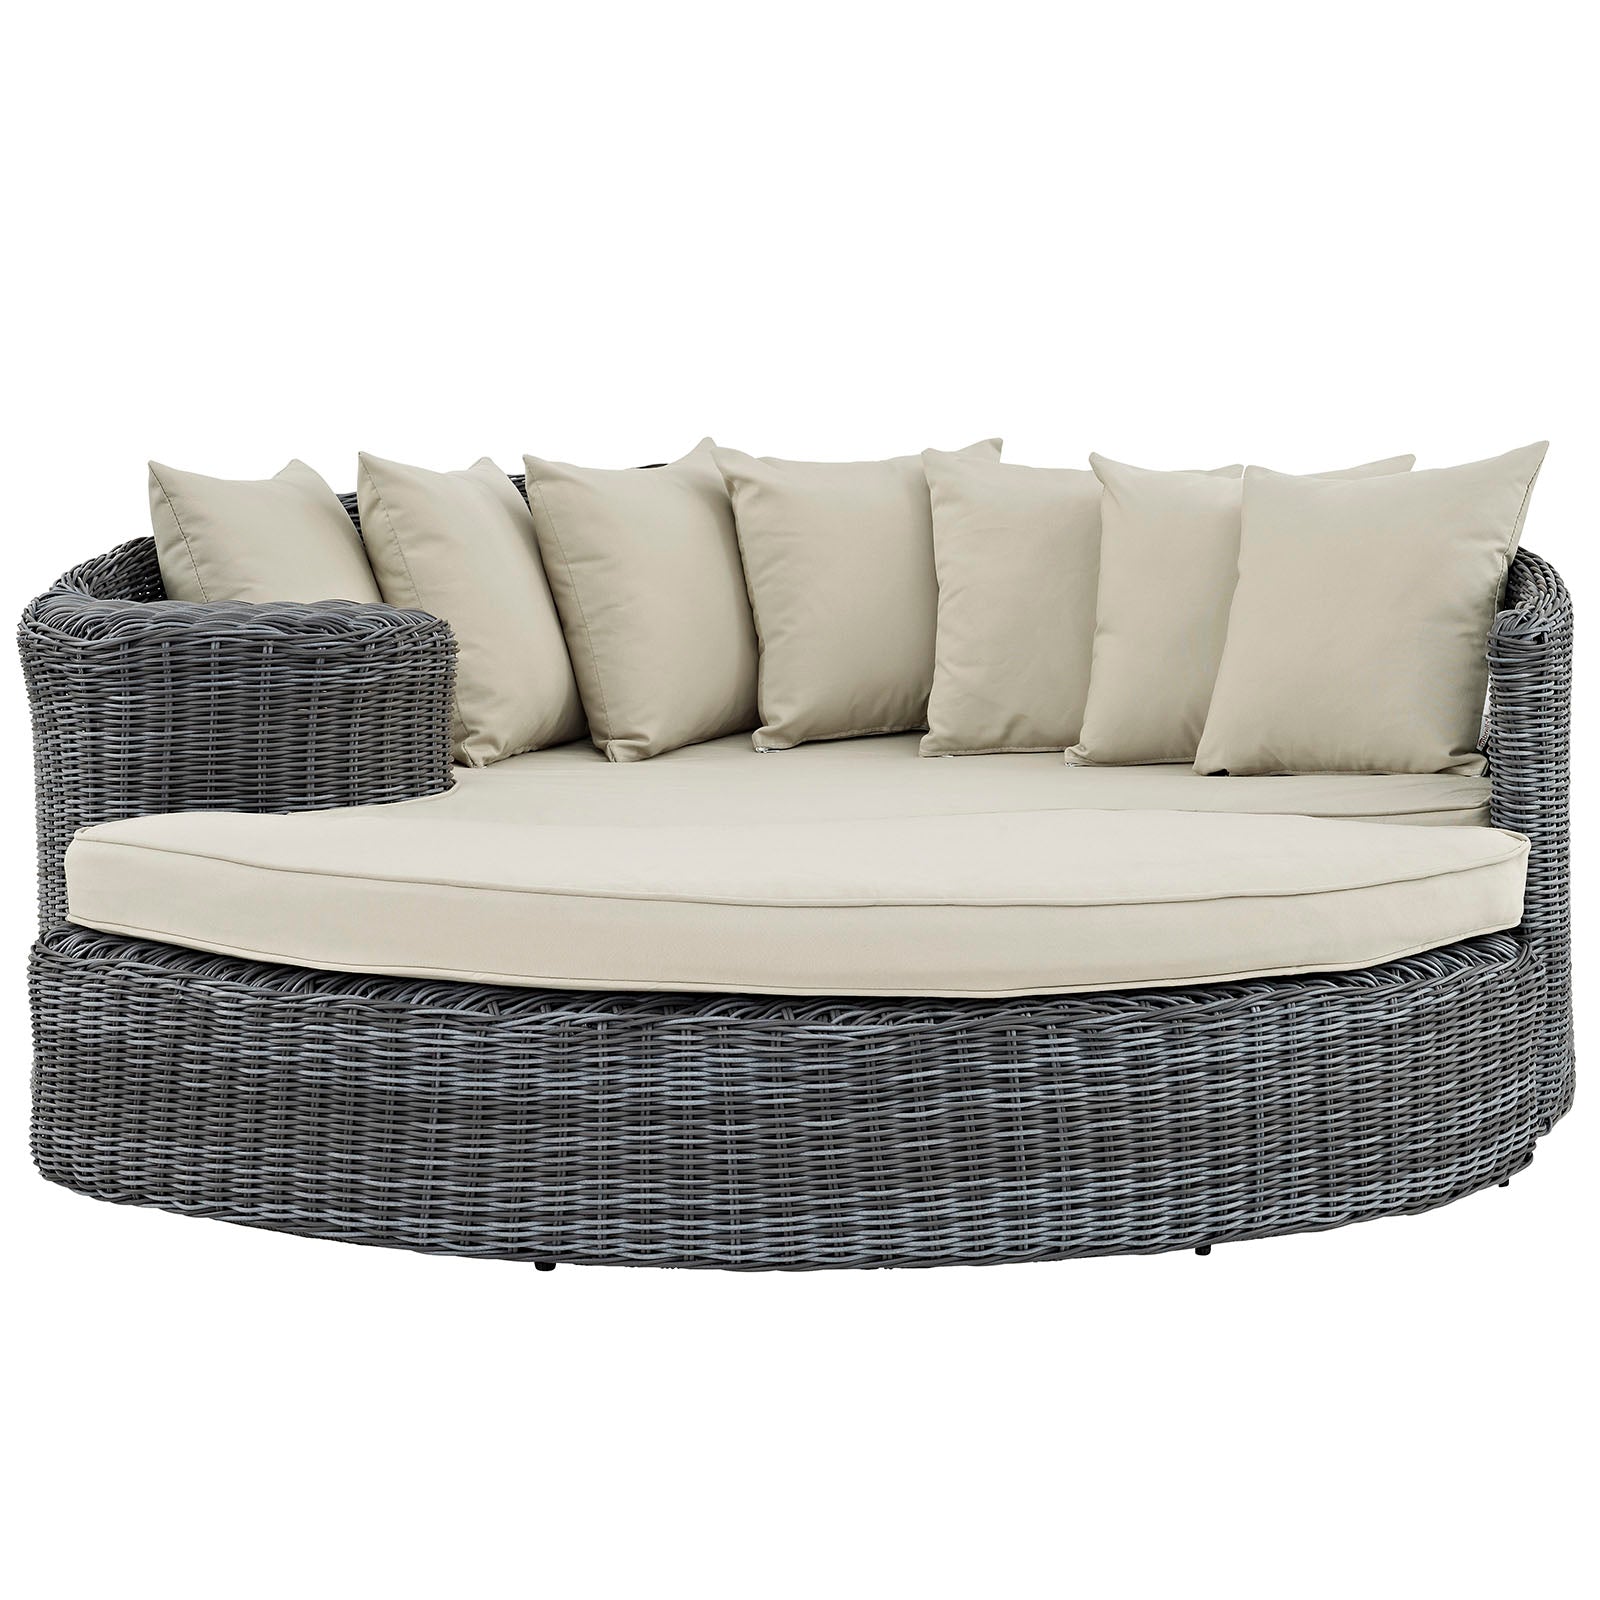 Modway Patio Daybeds - Summon Outdoor Patio Sunbrella Daybed Antique Canvas Beige